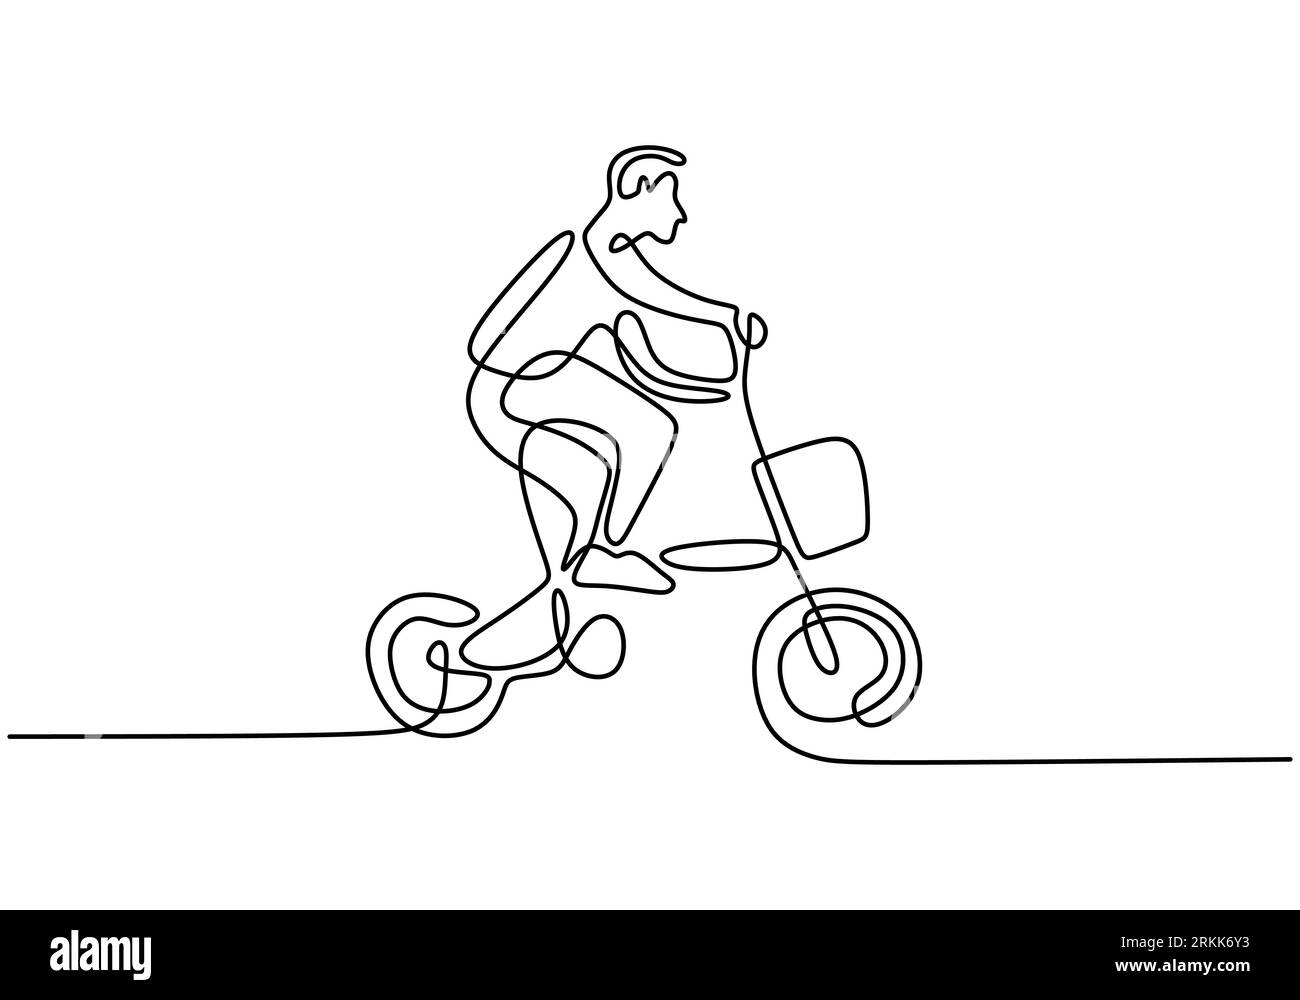 One continuous line drawing of young energetic man cycling ride folding bicycle to exercise. Healthy lifestyle concept lineart drawing vector illustra Stock Vector